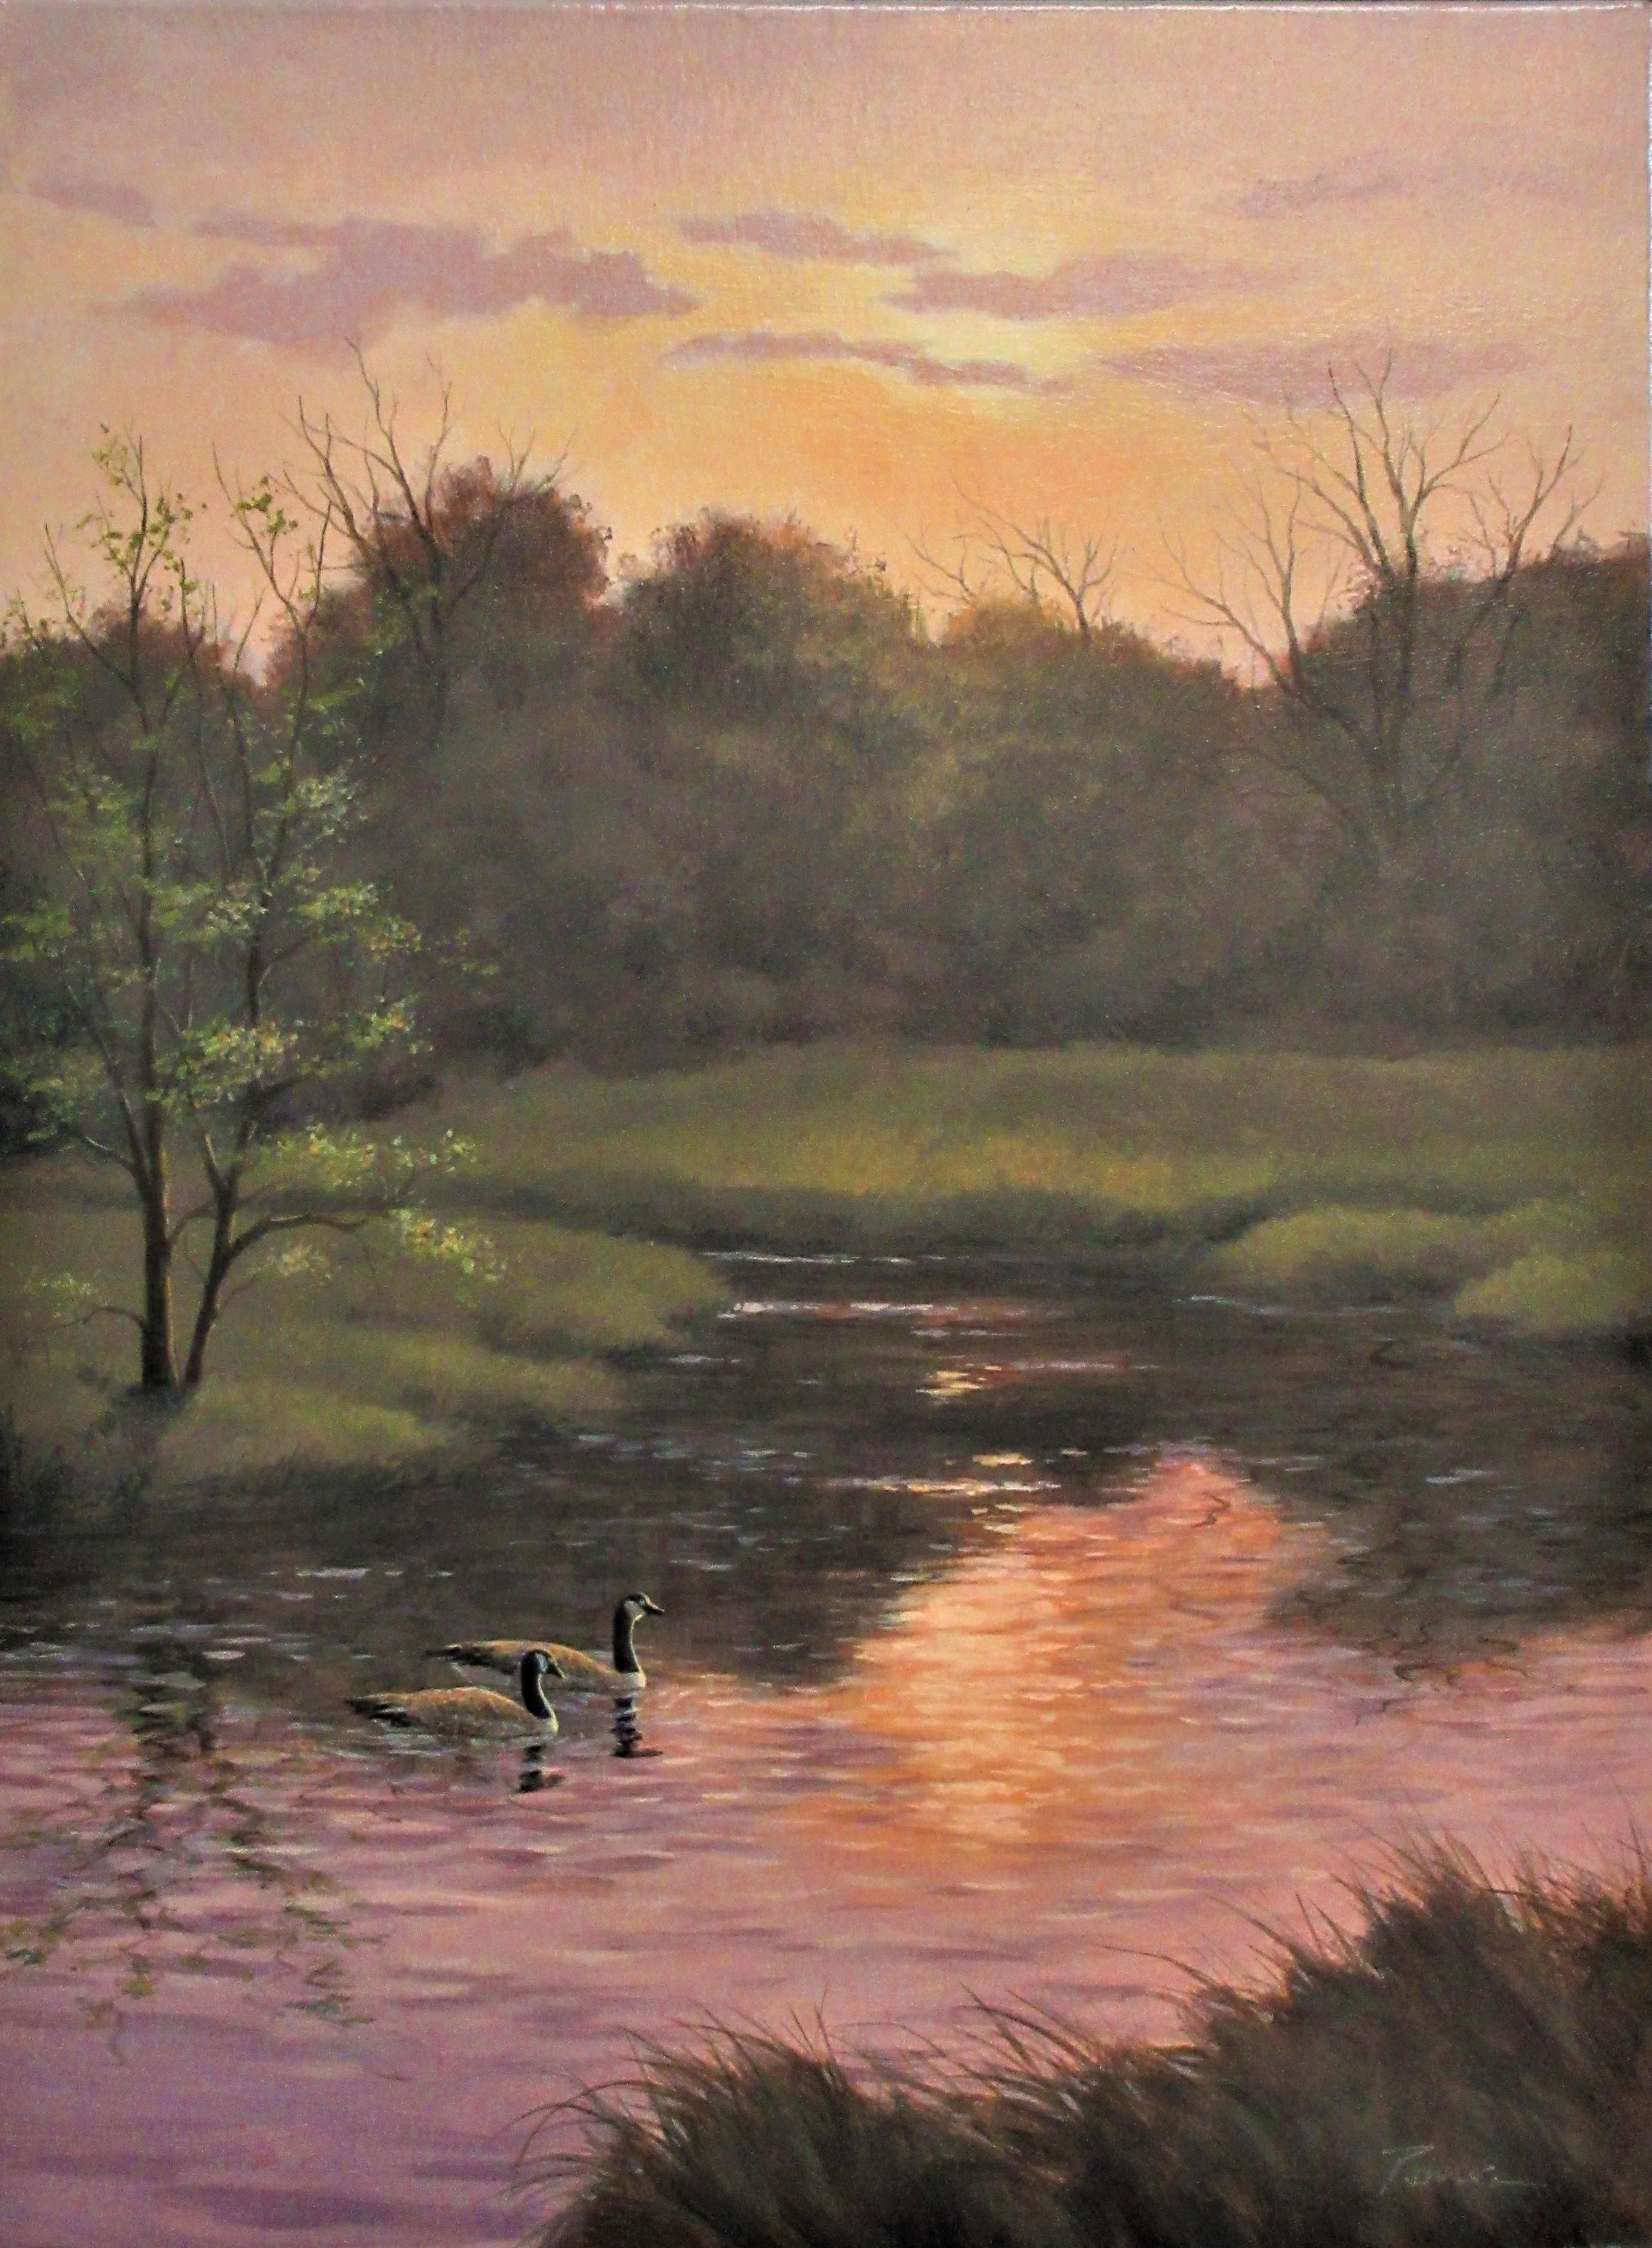 Quiet on the River, Original Painting - Art by Robert Pennor